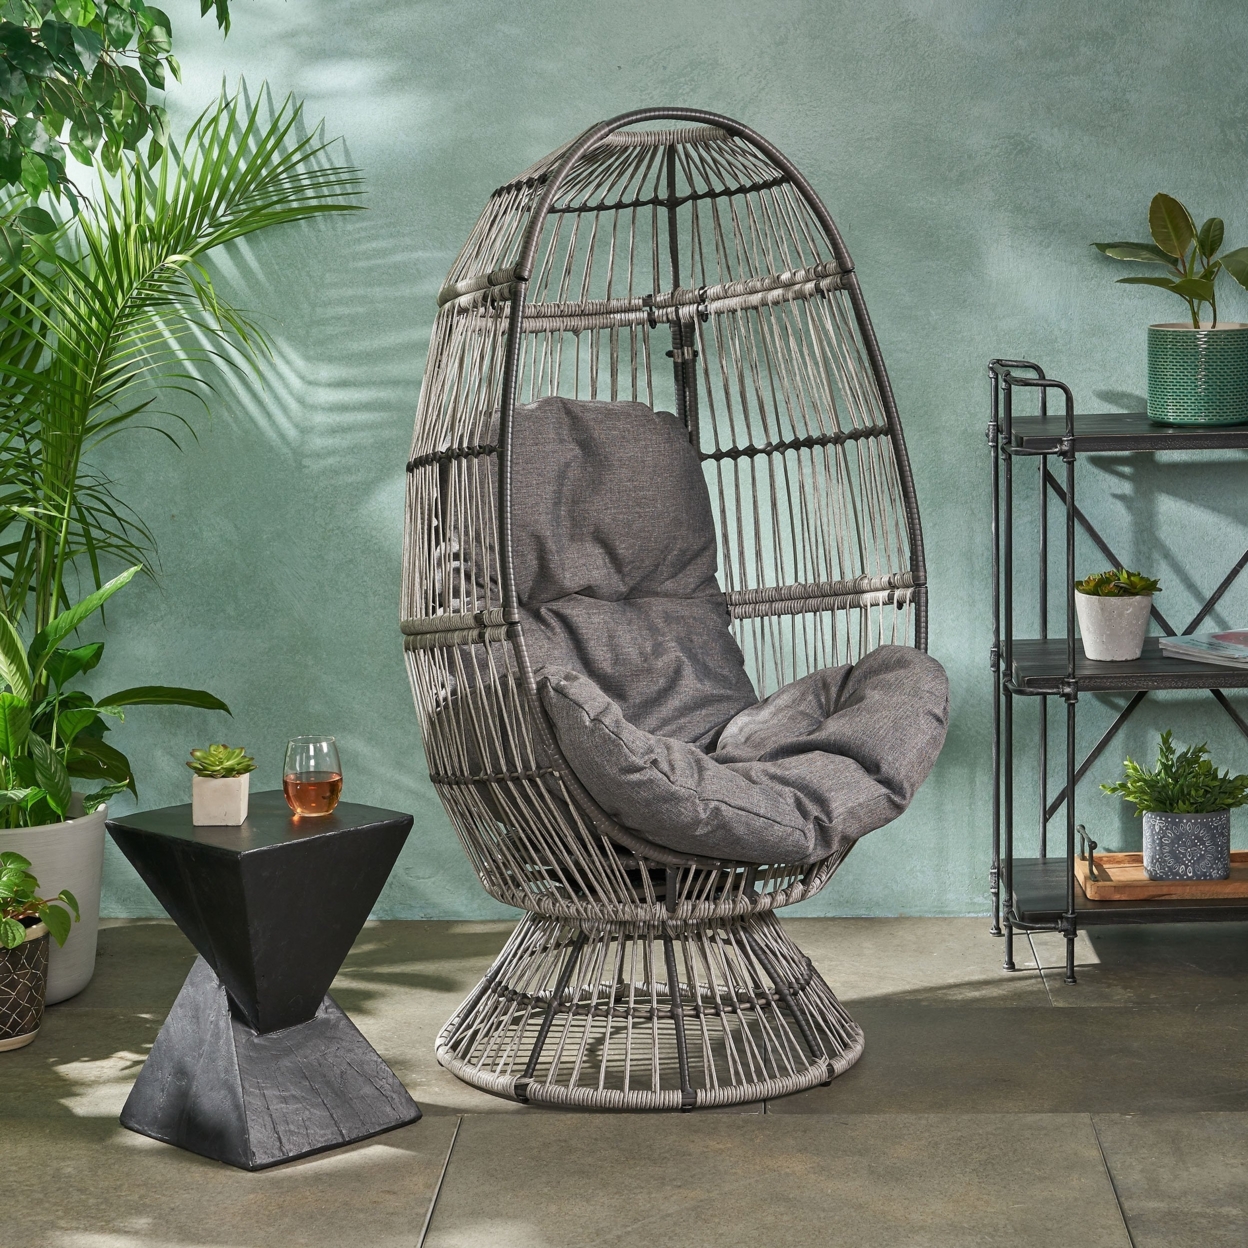 Aceson Outdoor Freestanding Wicker Swivel Egg Chair - Gray/dark Gray/taupe